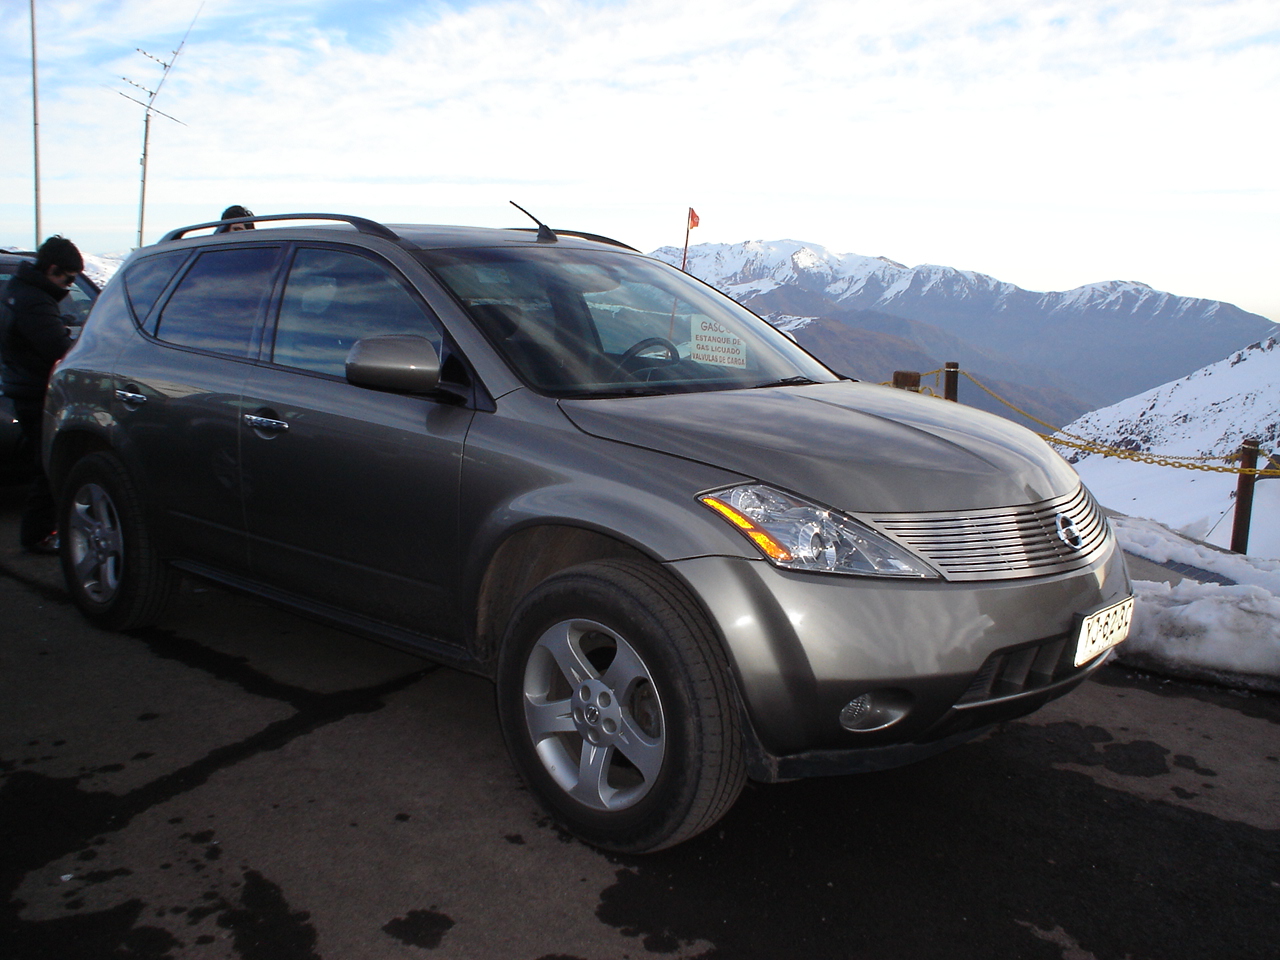 2005 Nissan murano video review #9